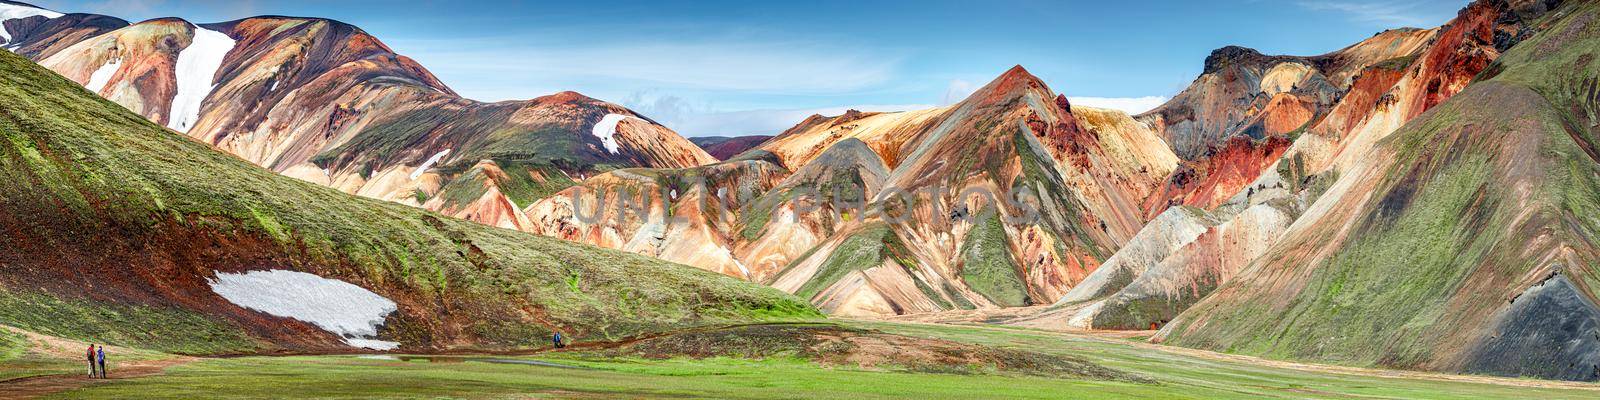 Panoramic true Icelandic rough landscape view of colorful rainbow volcanic Landmannalaugar mountains, volcanoes, streams and famous Laugavegur hiking trail, Iceland, summer